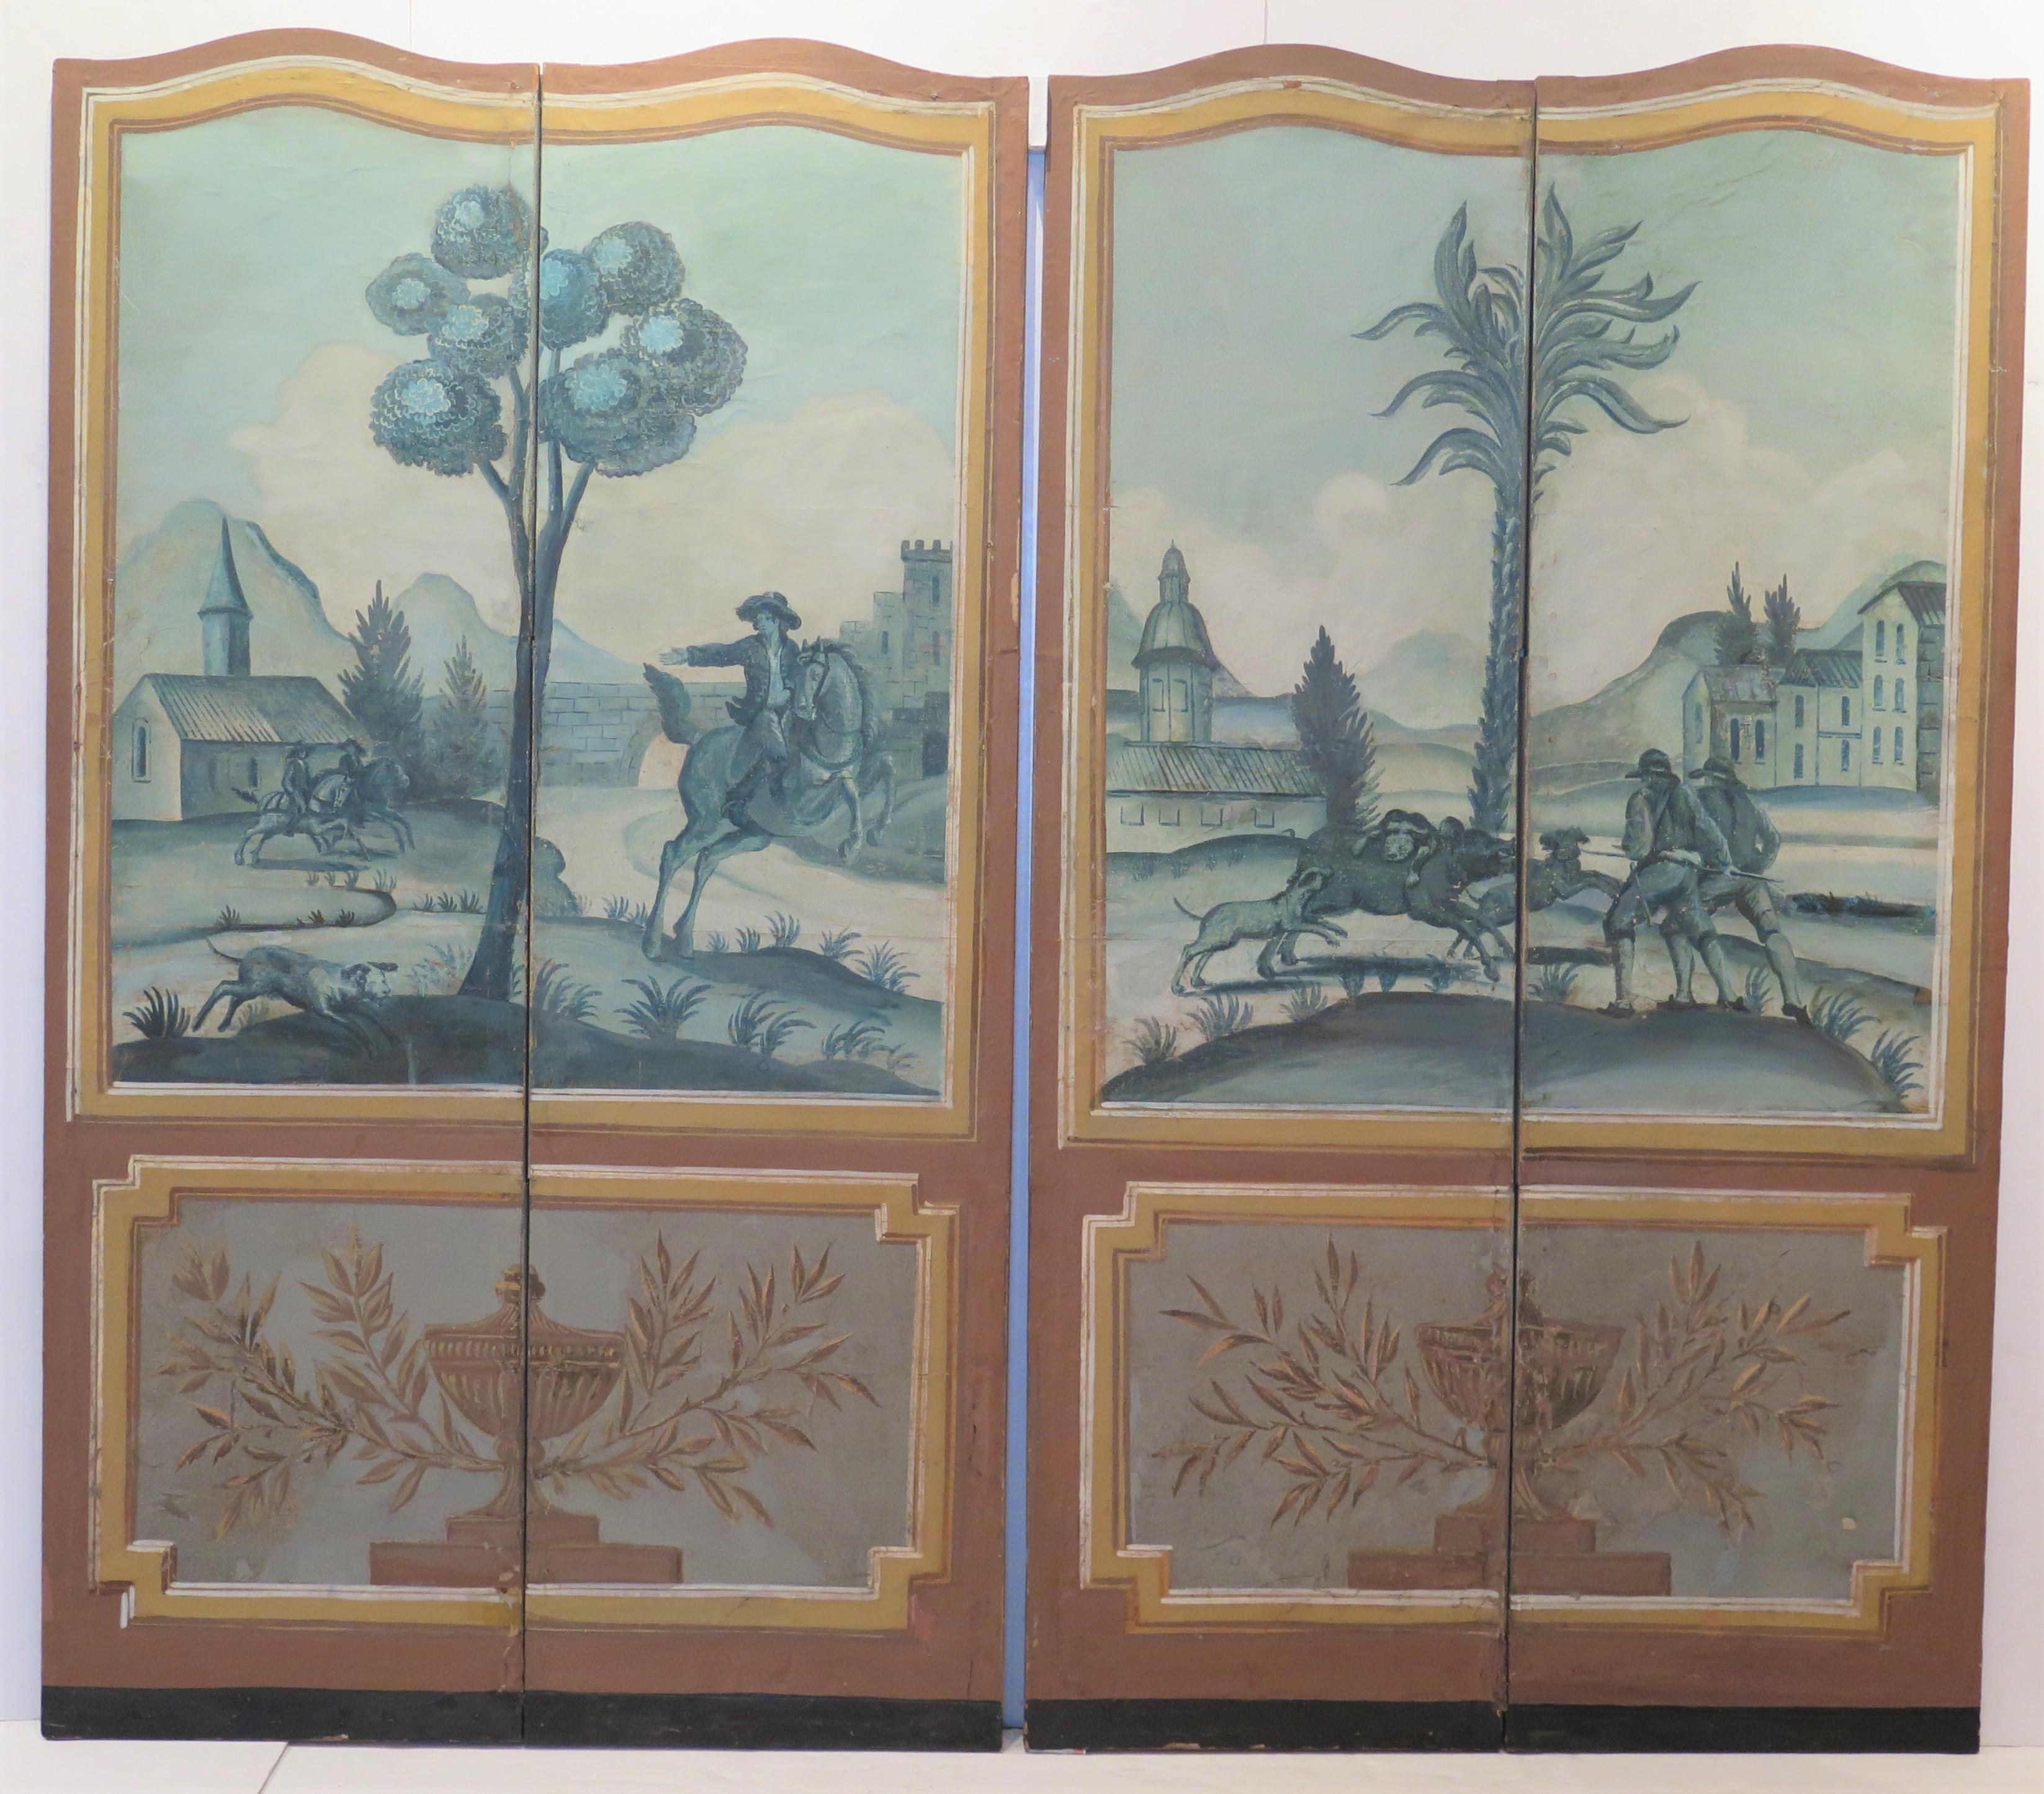 A Four Panel Screen With Arched Tops, Portion Painted In Gray-Blue, Depicting A Hunt Scene In Foreground With Men And Dogs Hunting A Boar; And Bottom Portion Of Panels Feature Larg Fluted Brown Urns, trimmed In Brown And Tan. Circa 18th Century. 